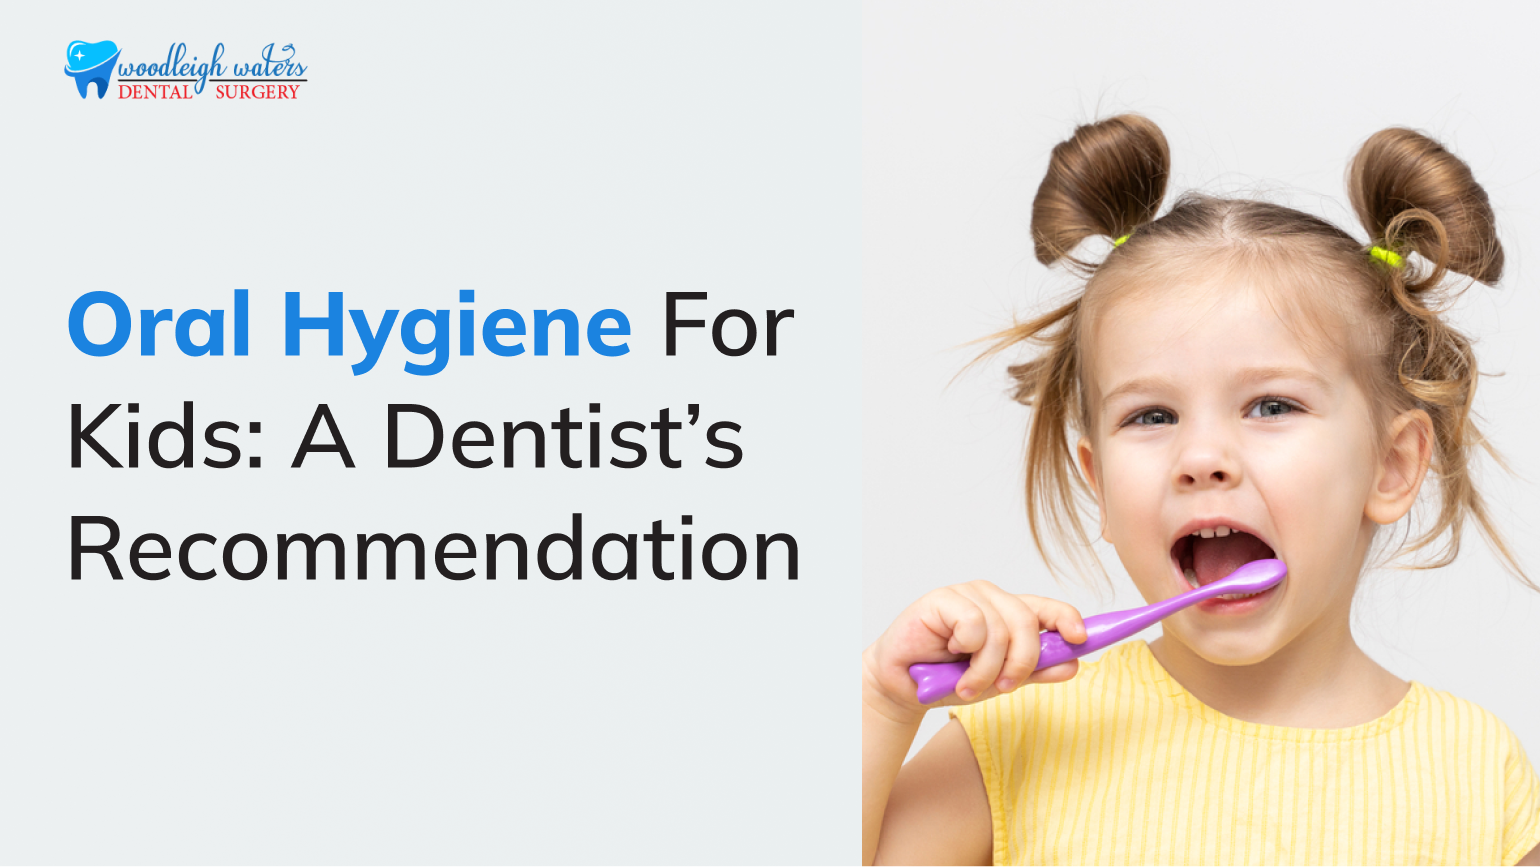 Oral Hygiene For Kids: A Dentist’s Recommendation